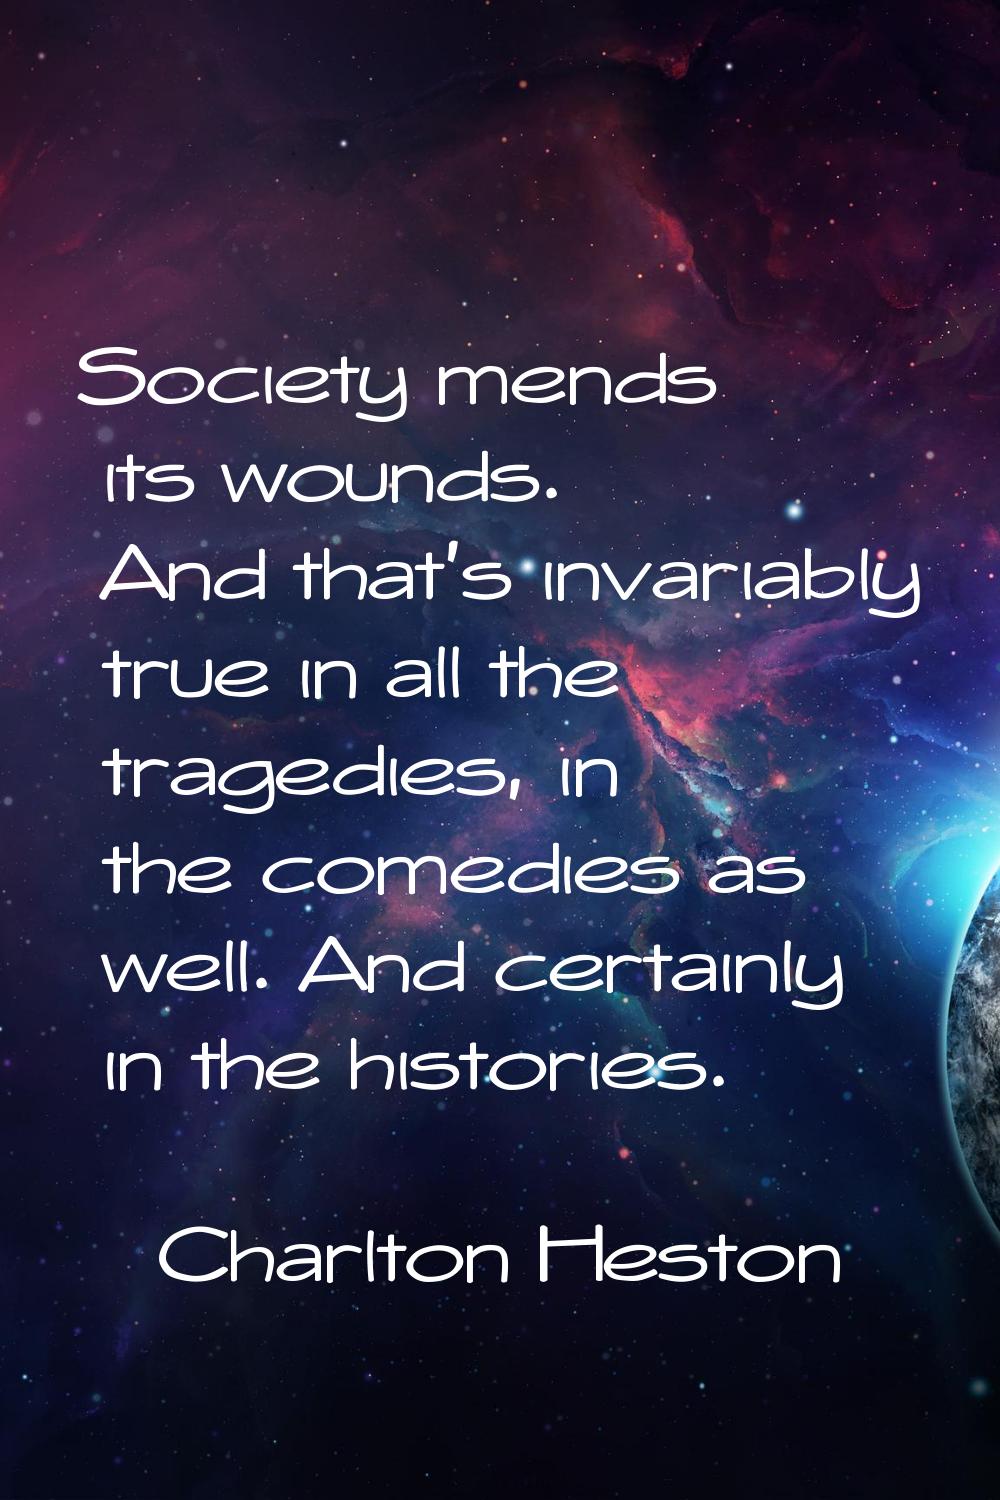 Society mends its wounds. And that's invariably true in all the tragedies, in the comedies as well.